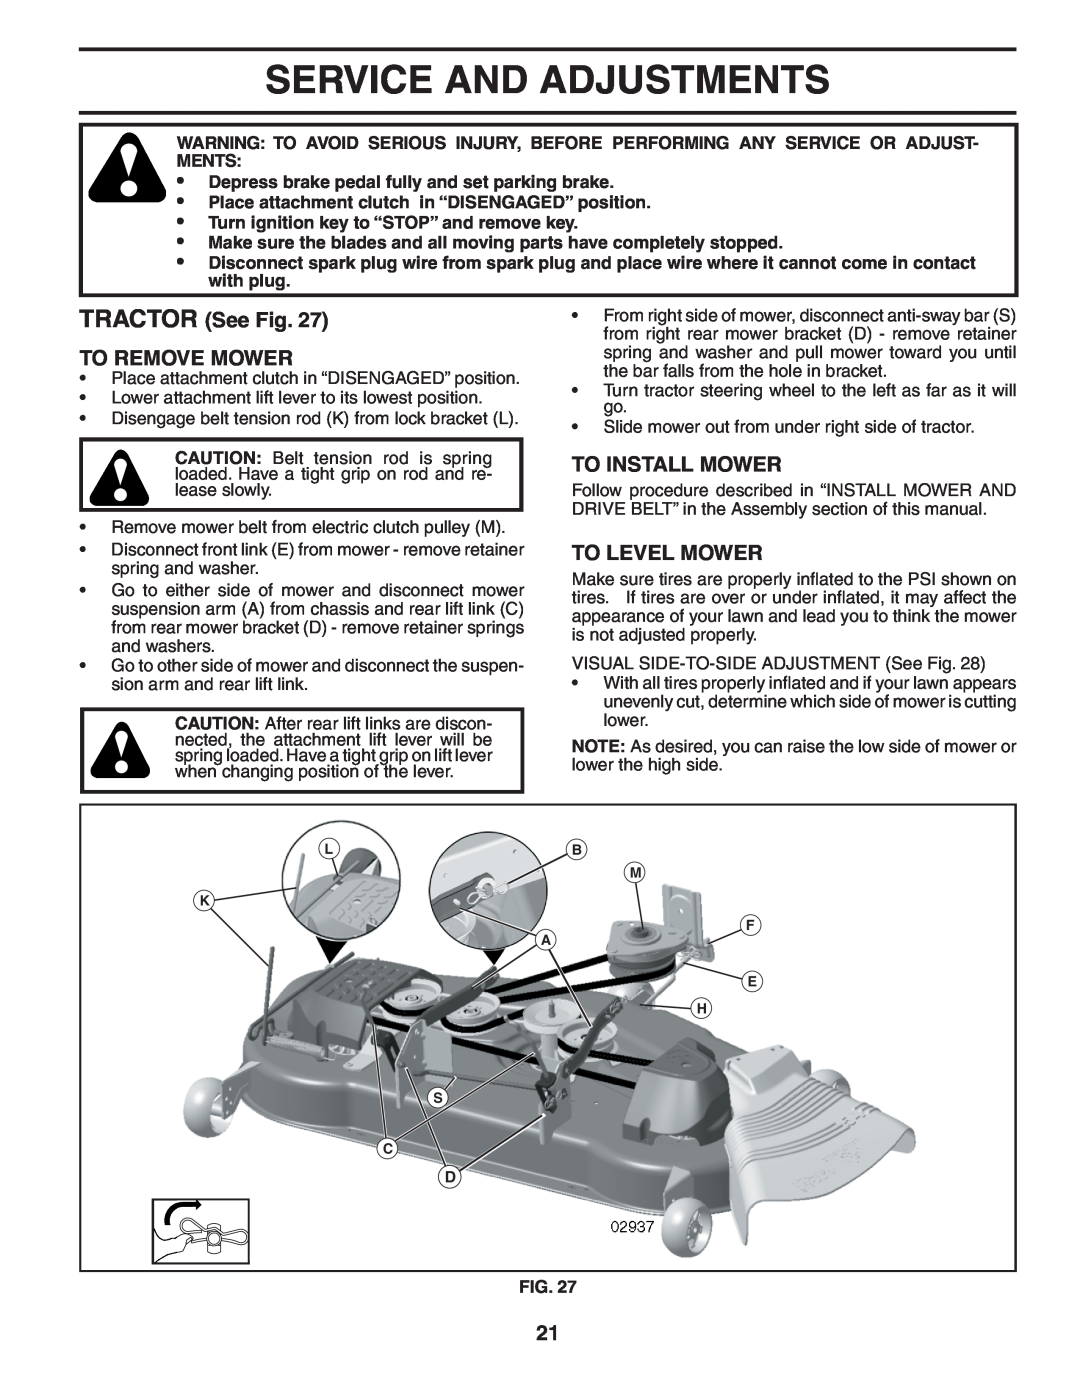 Husqvarna YTH2454T owner manual Service And Adjustments, TRACTOR See Fig. TO REMOVE MOWER, To Install Mower, To Level Mower 